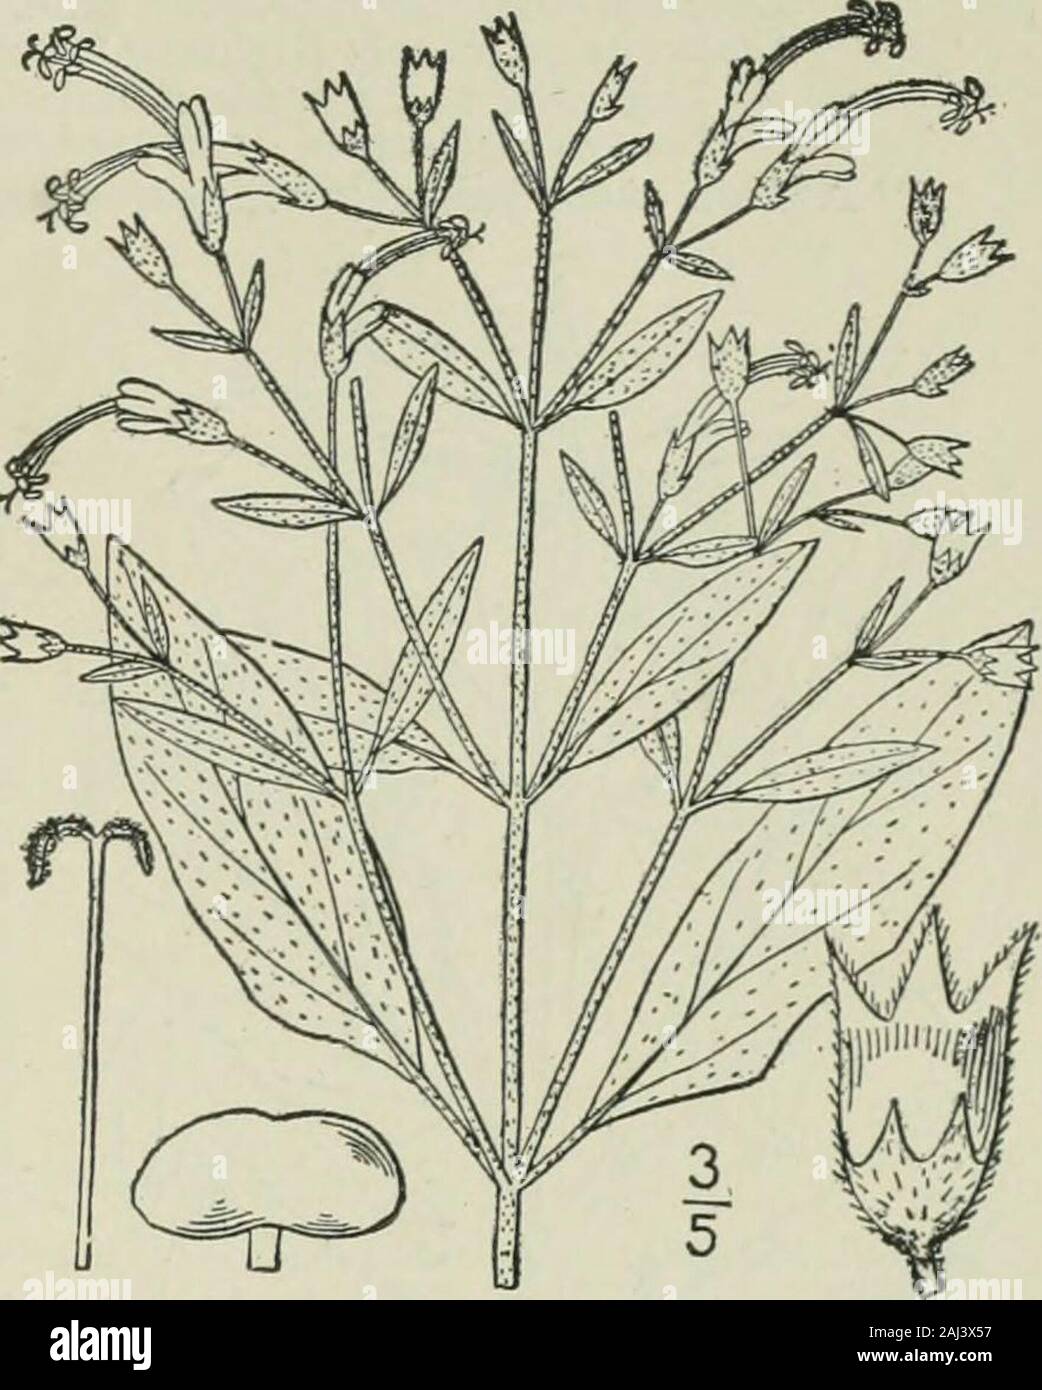 An illustrated flora of the northern United States, Canada and the British possessions : from Newfoundland to the parallel of the southern boundary of Virginia and from the Atlantic Ocean westward to the 102nd meridian . 2. Trichostema lineare Nutt. Narrow-leavedBlue Curls. Fig. 3574. T. brachiatum Lam. Encycl. 8: 84. 1808. Not L. 1753.Trichostema lineare Nutt. Gen. 2: 39. 1818. Puberulent or glabrous, not viscid or scarcely so;stem very slender, at length widely branched, 0-18high, the branches ascending. Leaves linear, obtuseor subacute, sessile or very short-petioled, i-2 long,I -2 wide, so Stock Photo